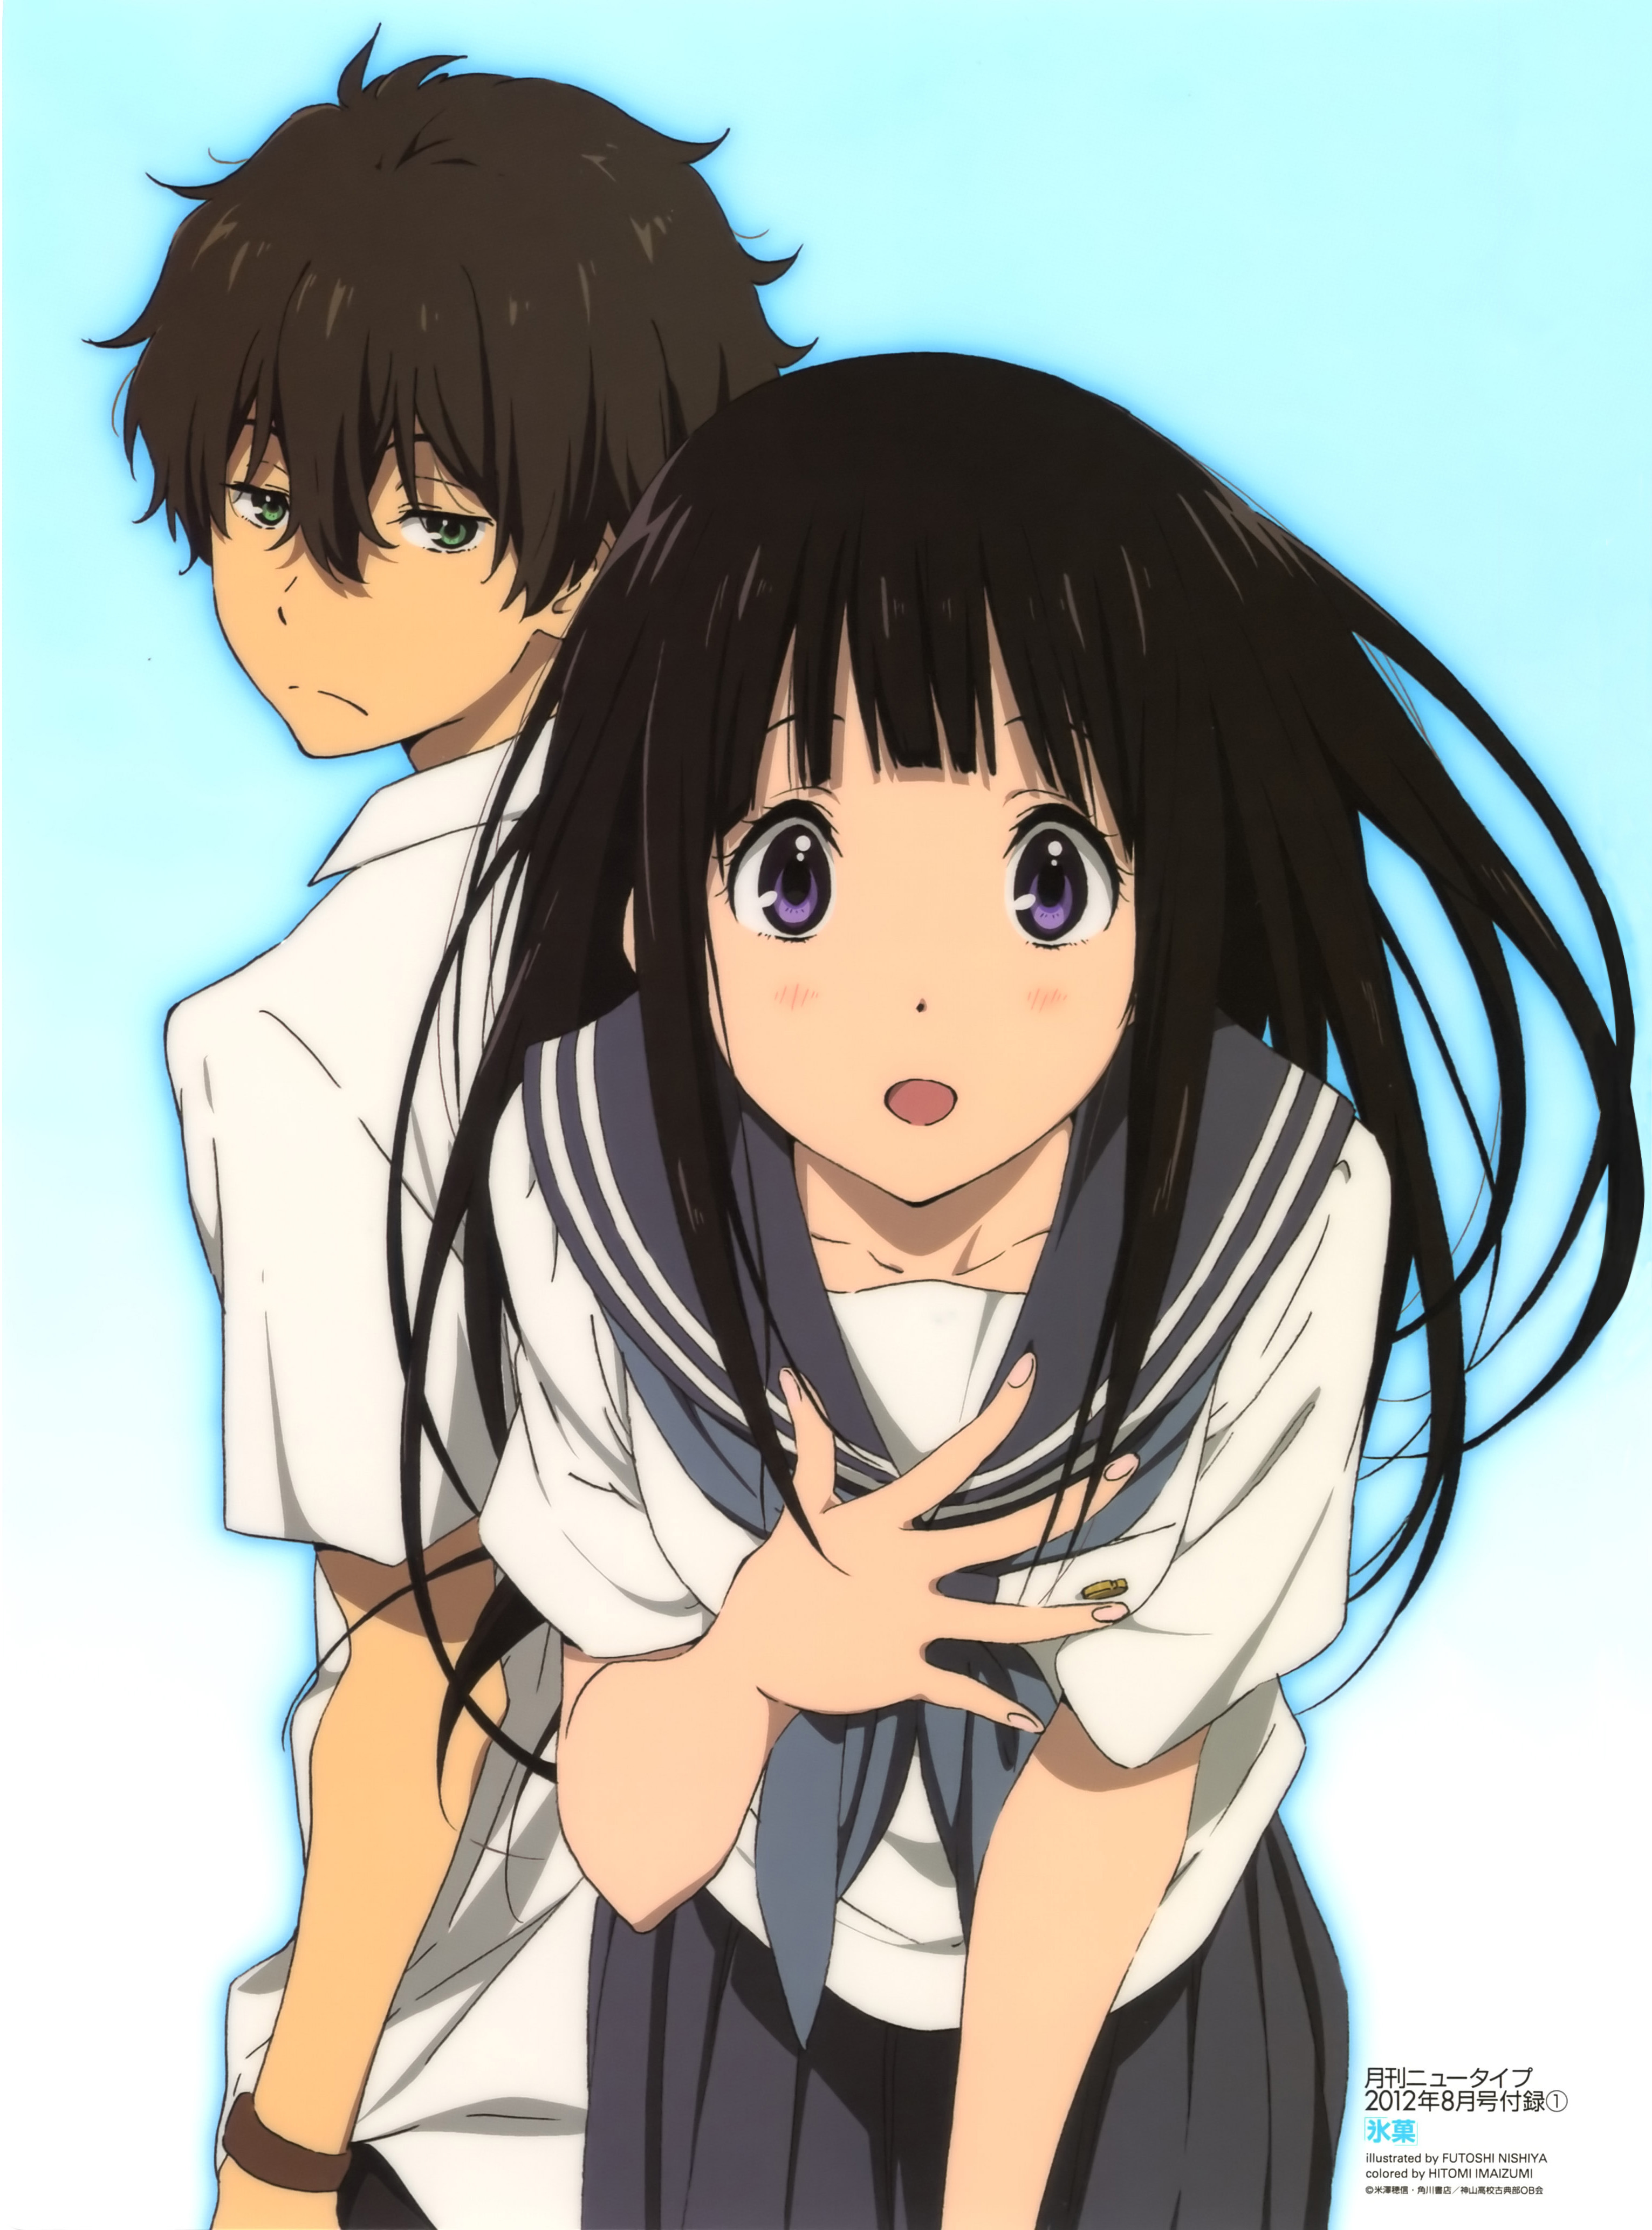 Wallpaper And Scan Gallery - Anime Hyouka , HD Wallpaper & Backgrounds